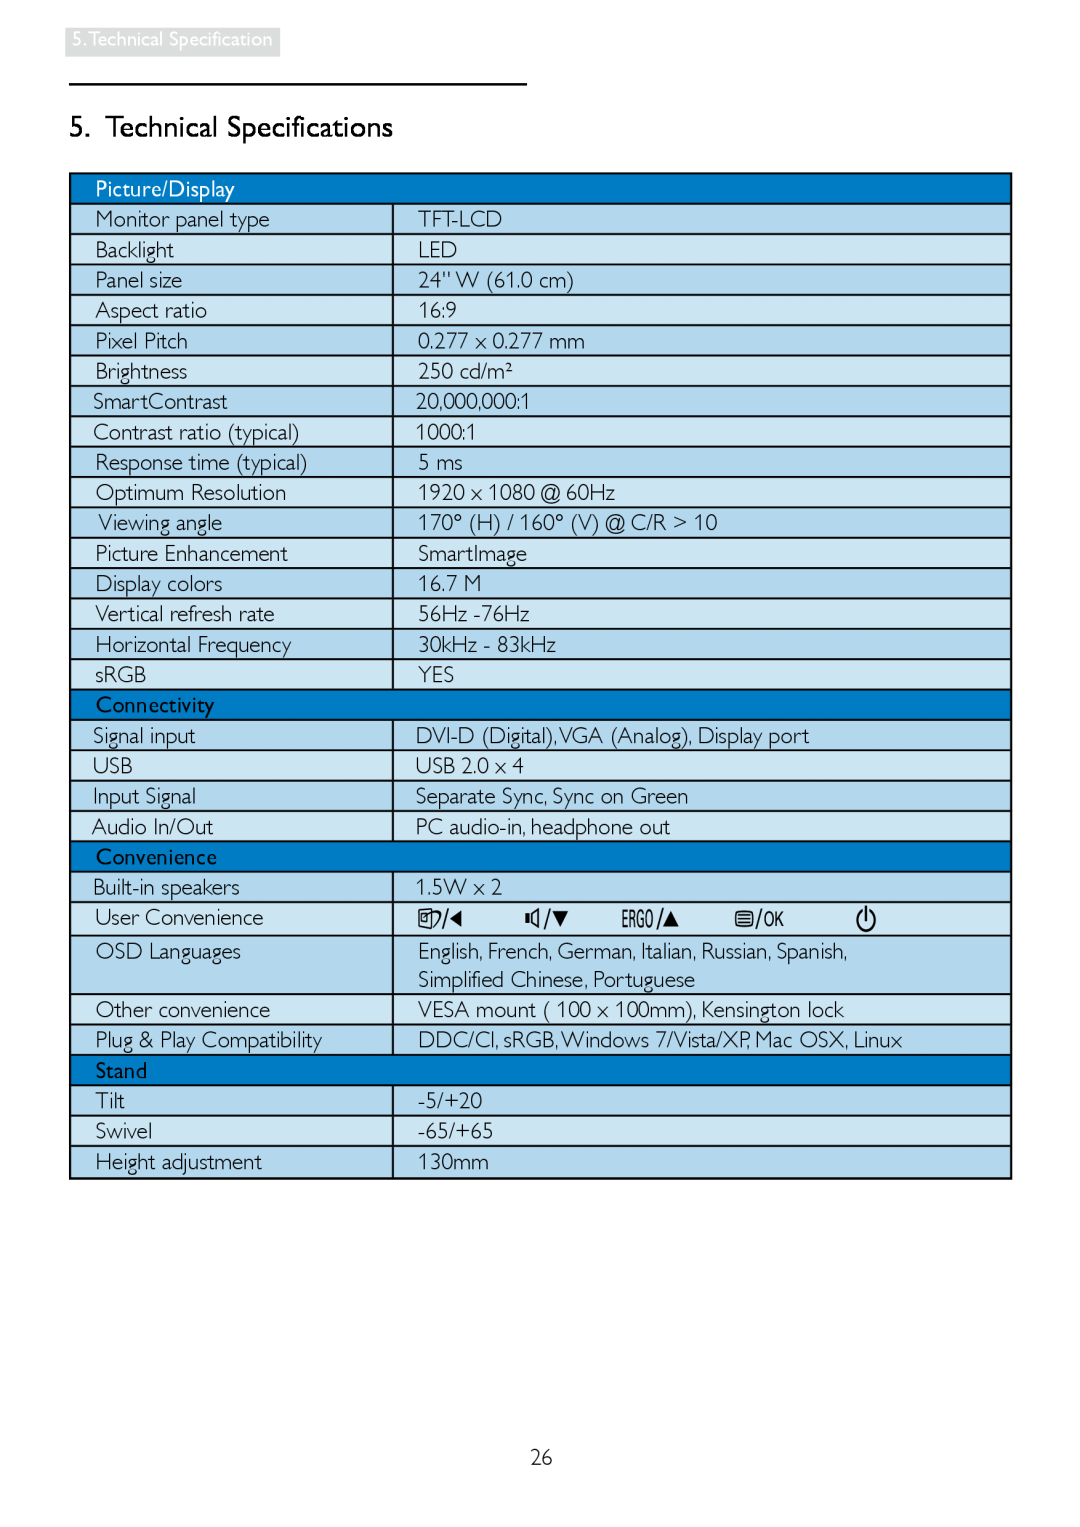 Philips 241P4LRY user manual Technical Specifications, Picture/Display 